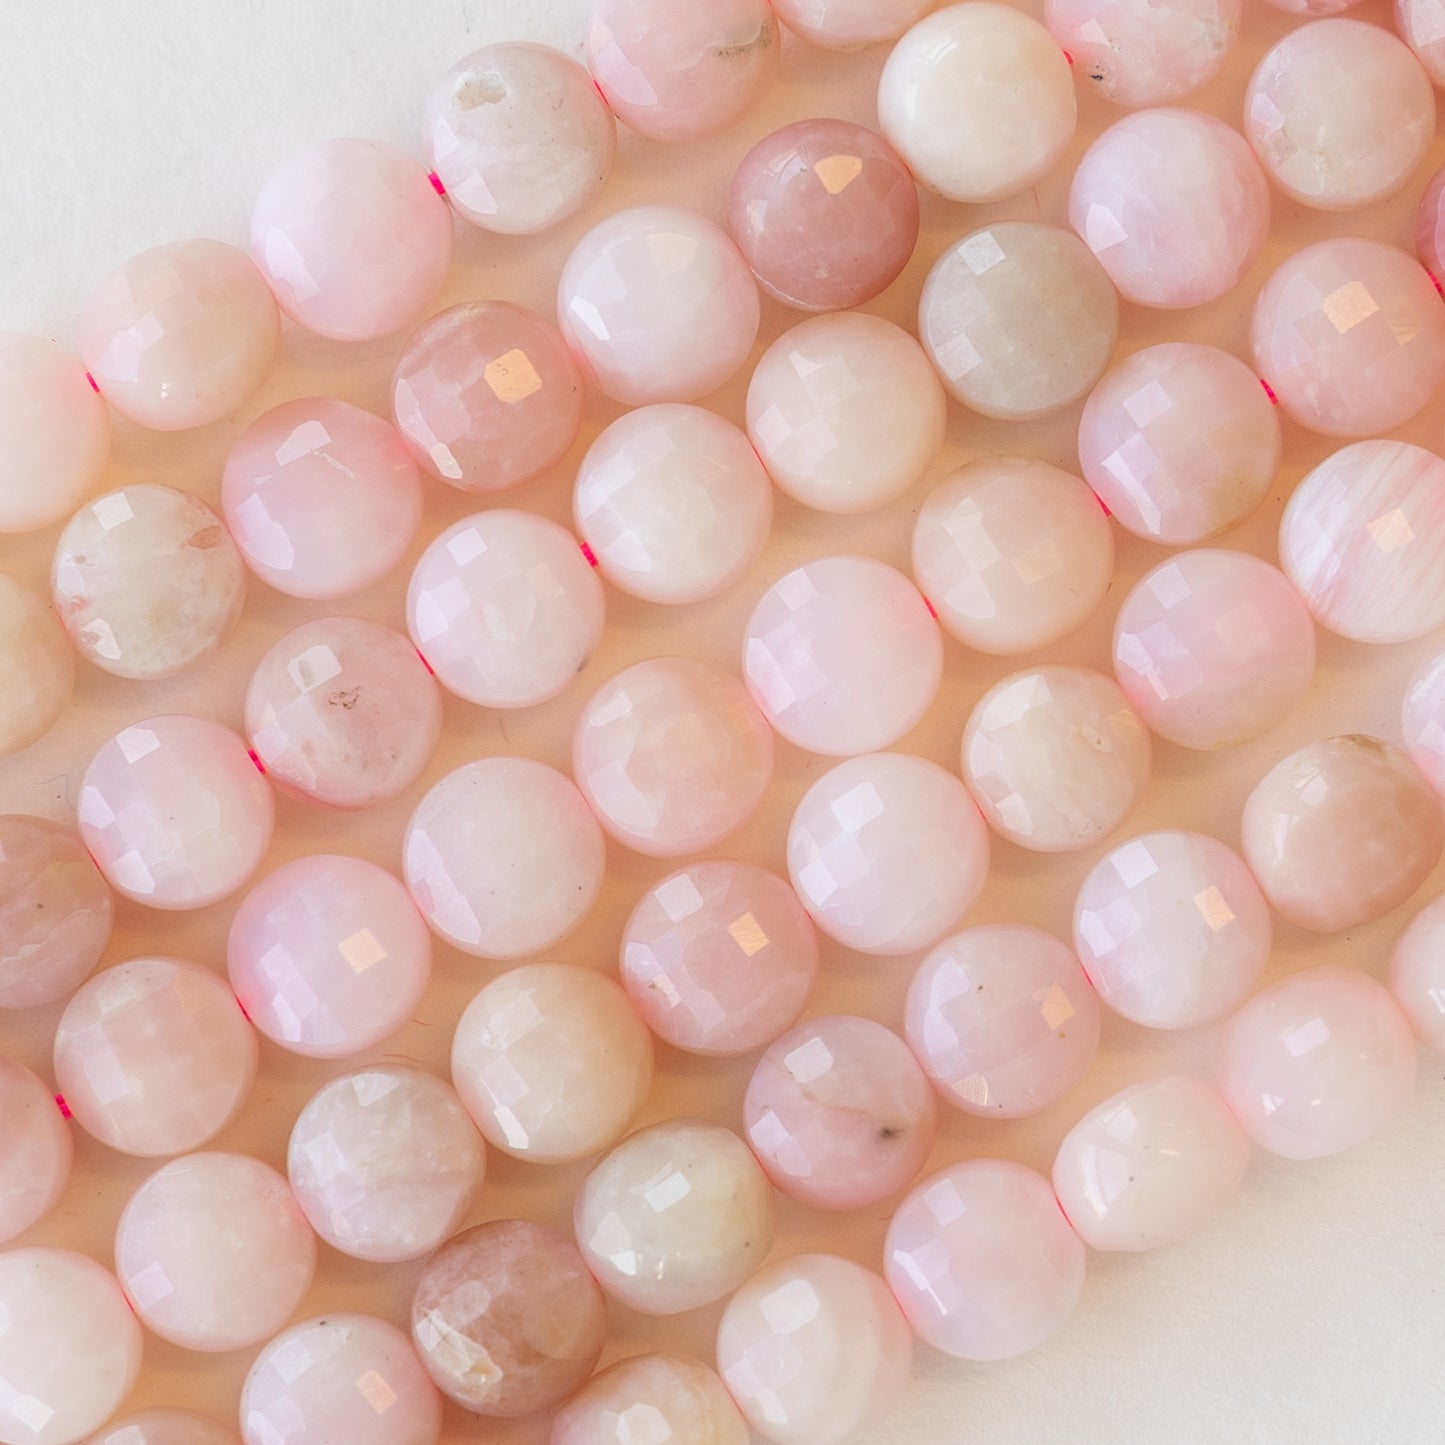 6mm Peruvian Faceted Pink Opal Coin Beads - 16 Inches